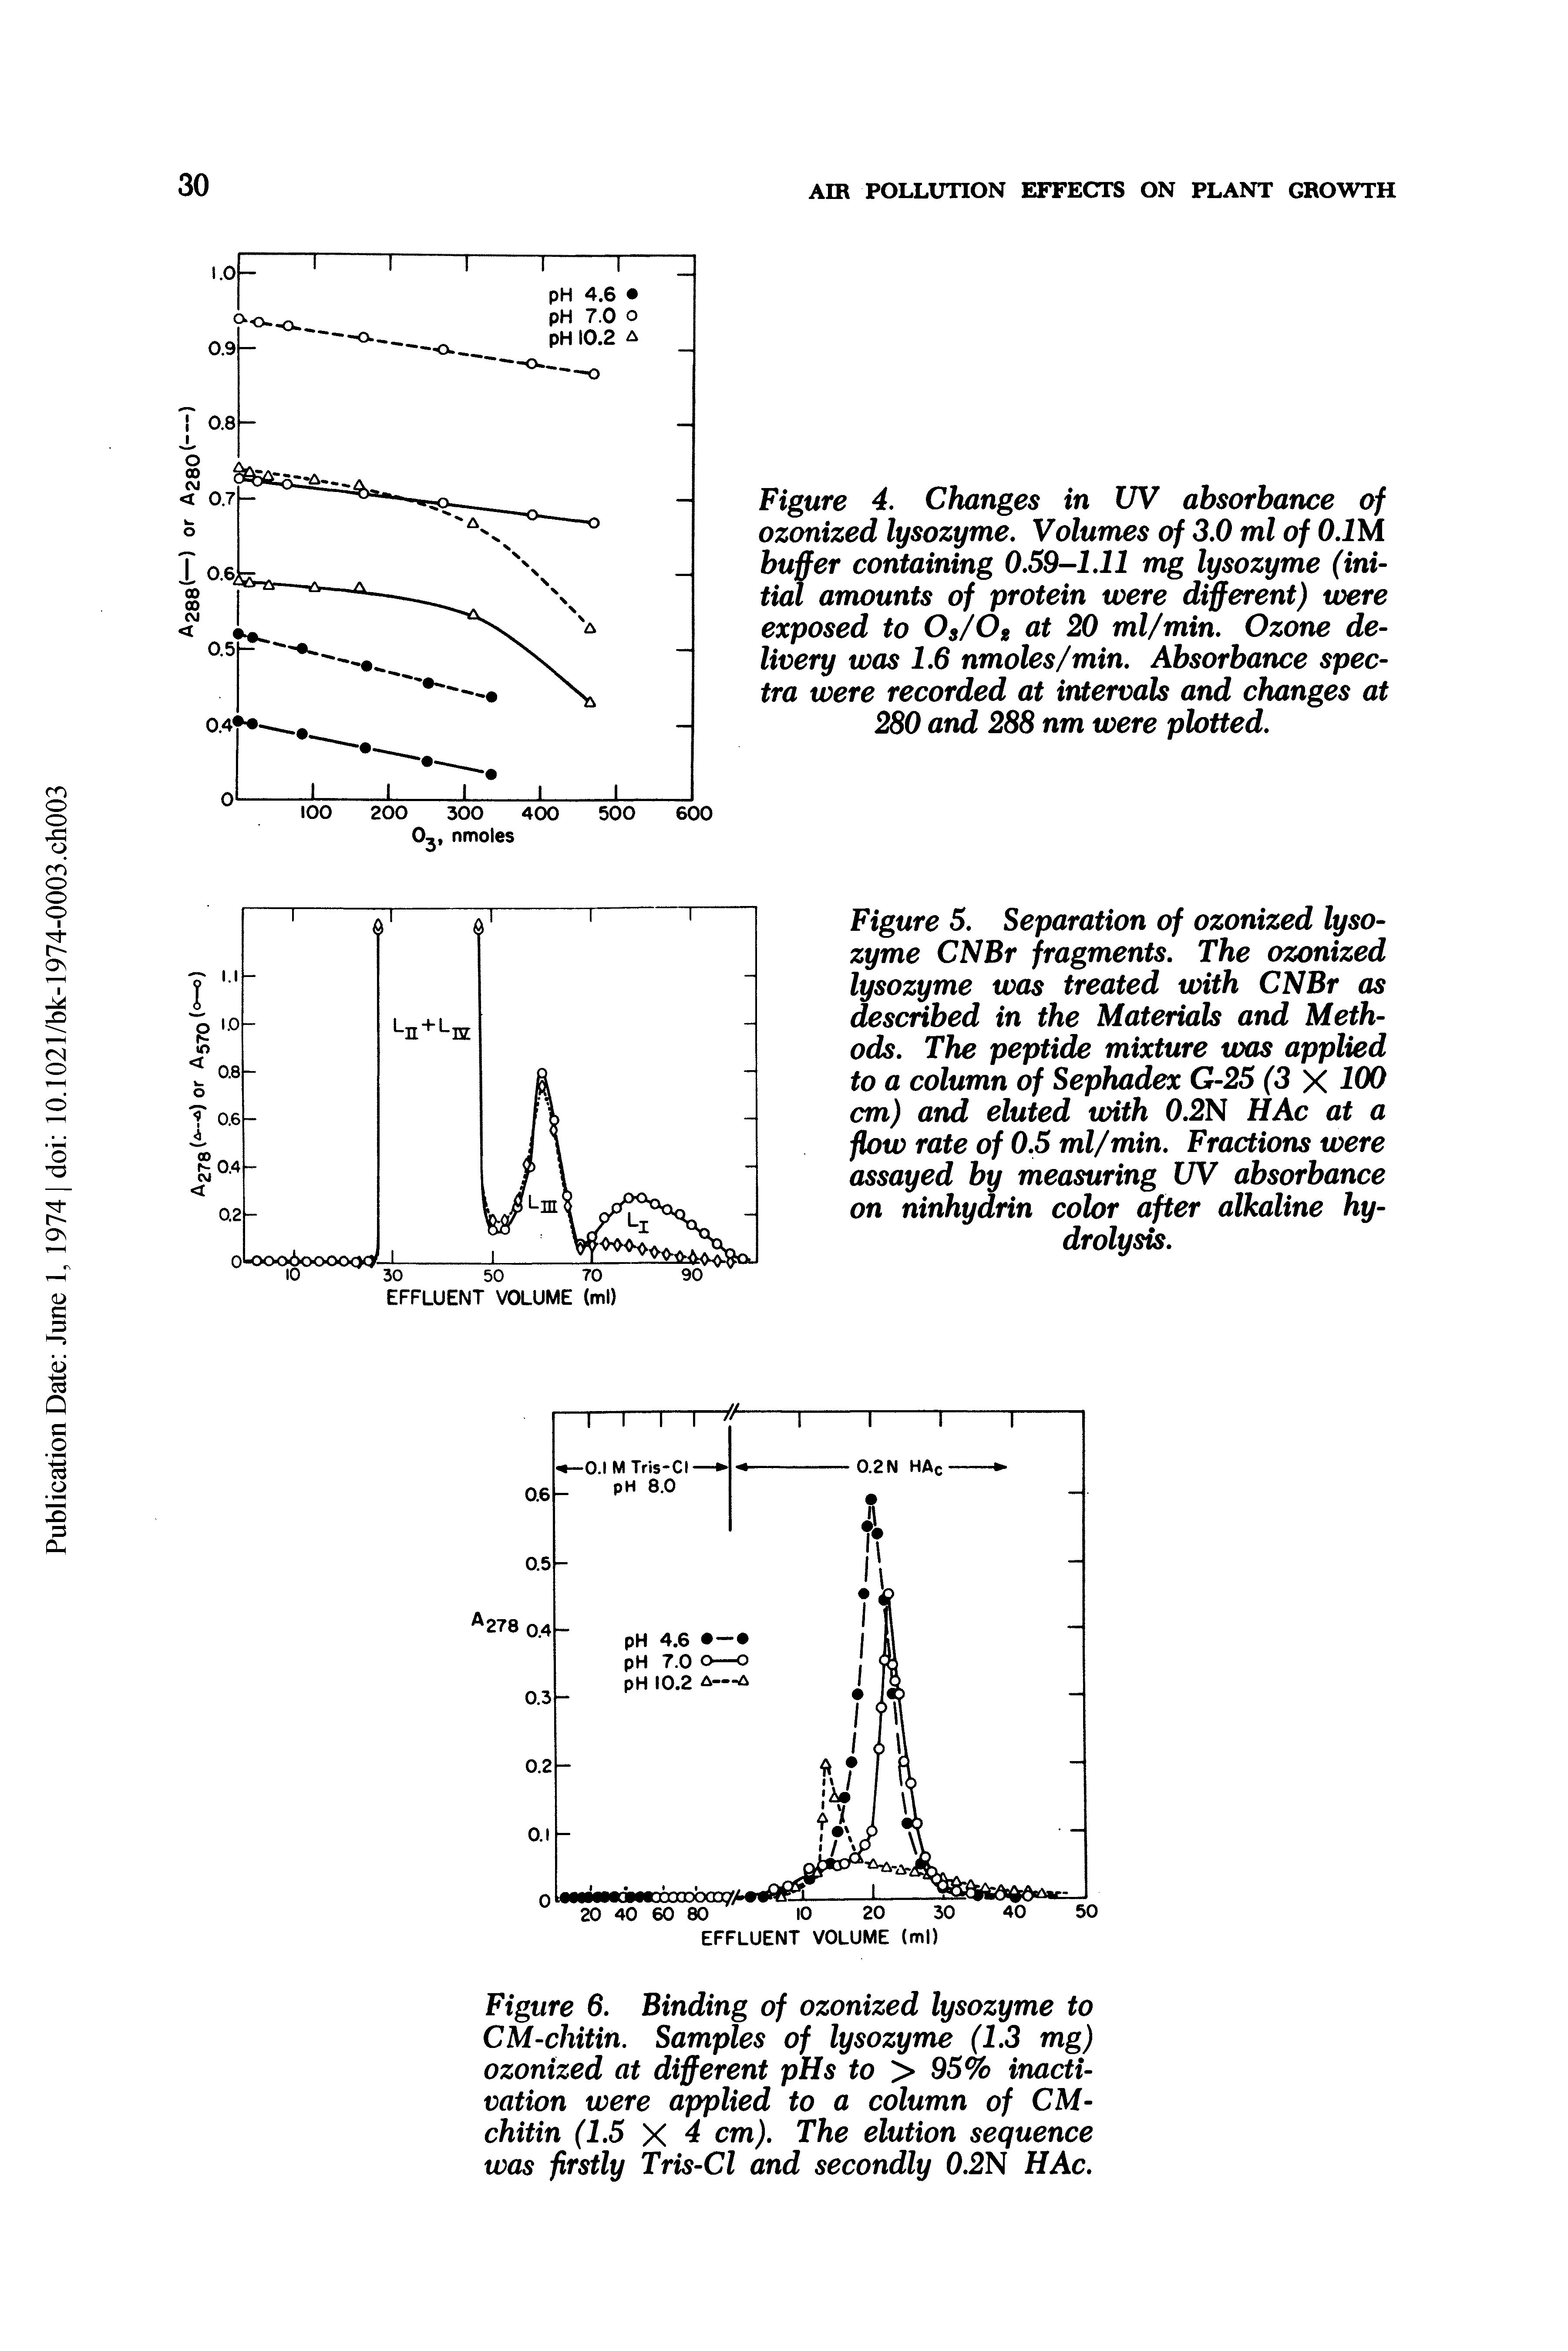 Figure 5. Separation of ozonized lysozyme CNBr fragments. The ozonized lysozyme was treated with CNBr as described in the Materials and Methods. The peptide mixture was applied to a column of Sephadex G-25 (3 X 100 cm) and eluted with 0.2N HAc at a flow rate of 0.5 ml/min. Fractions were assayed by measuring UV absorbance on ninhydrin color after alkaline hydrolysis.